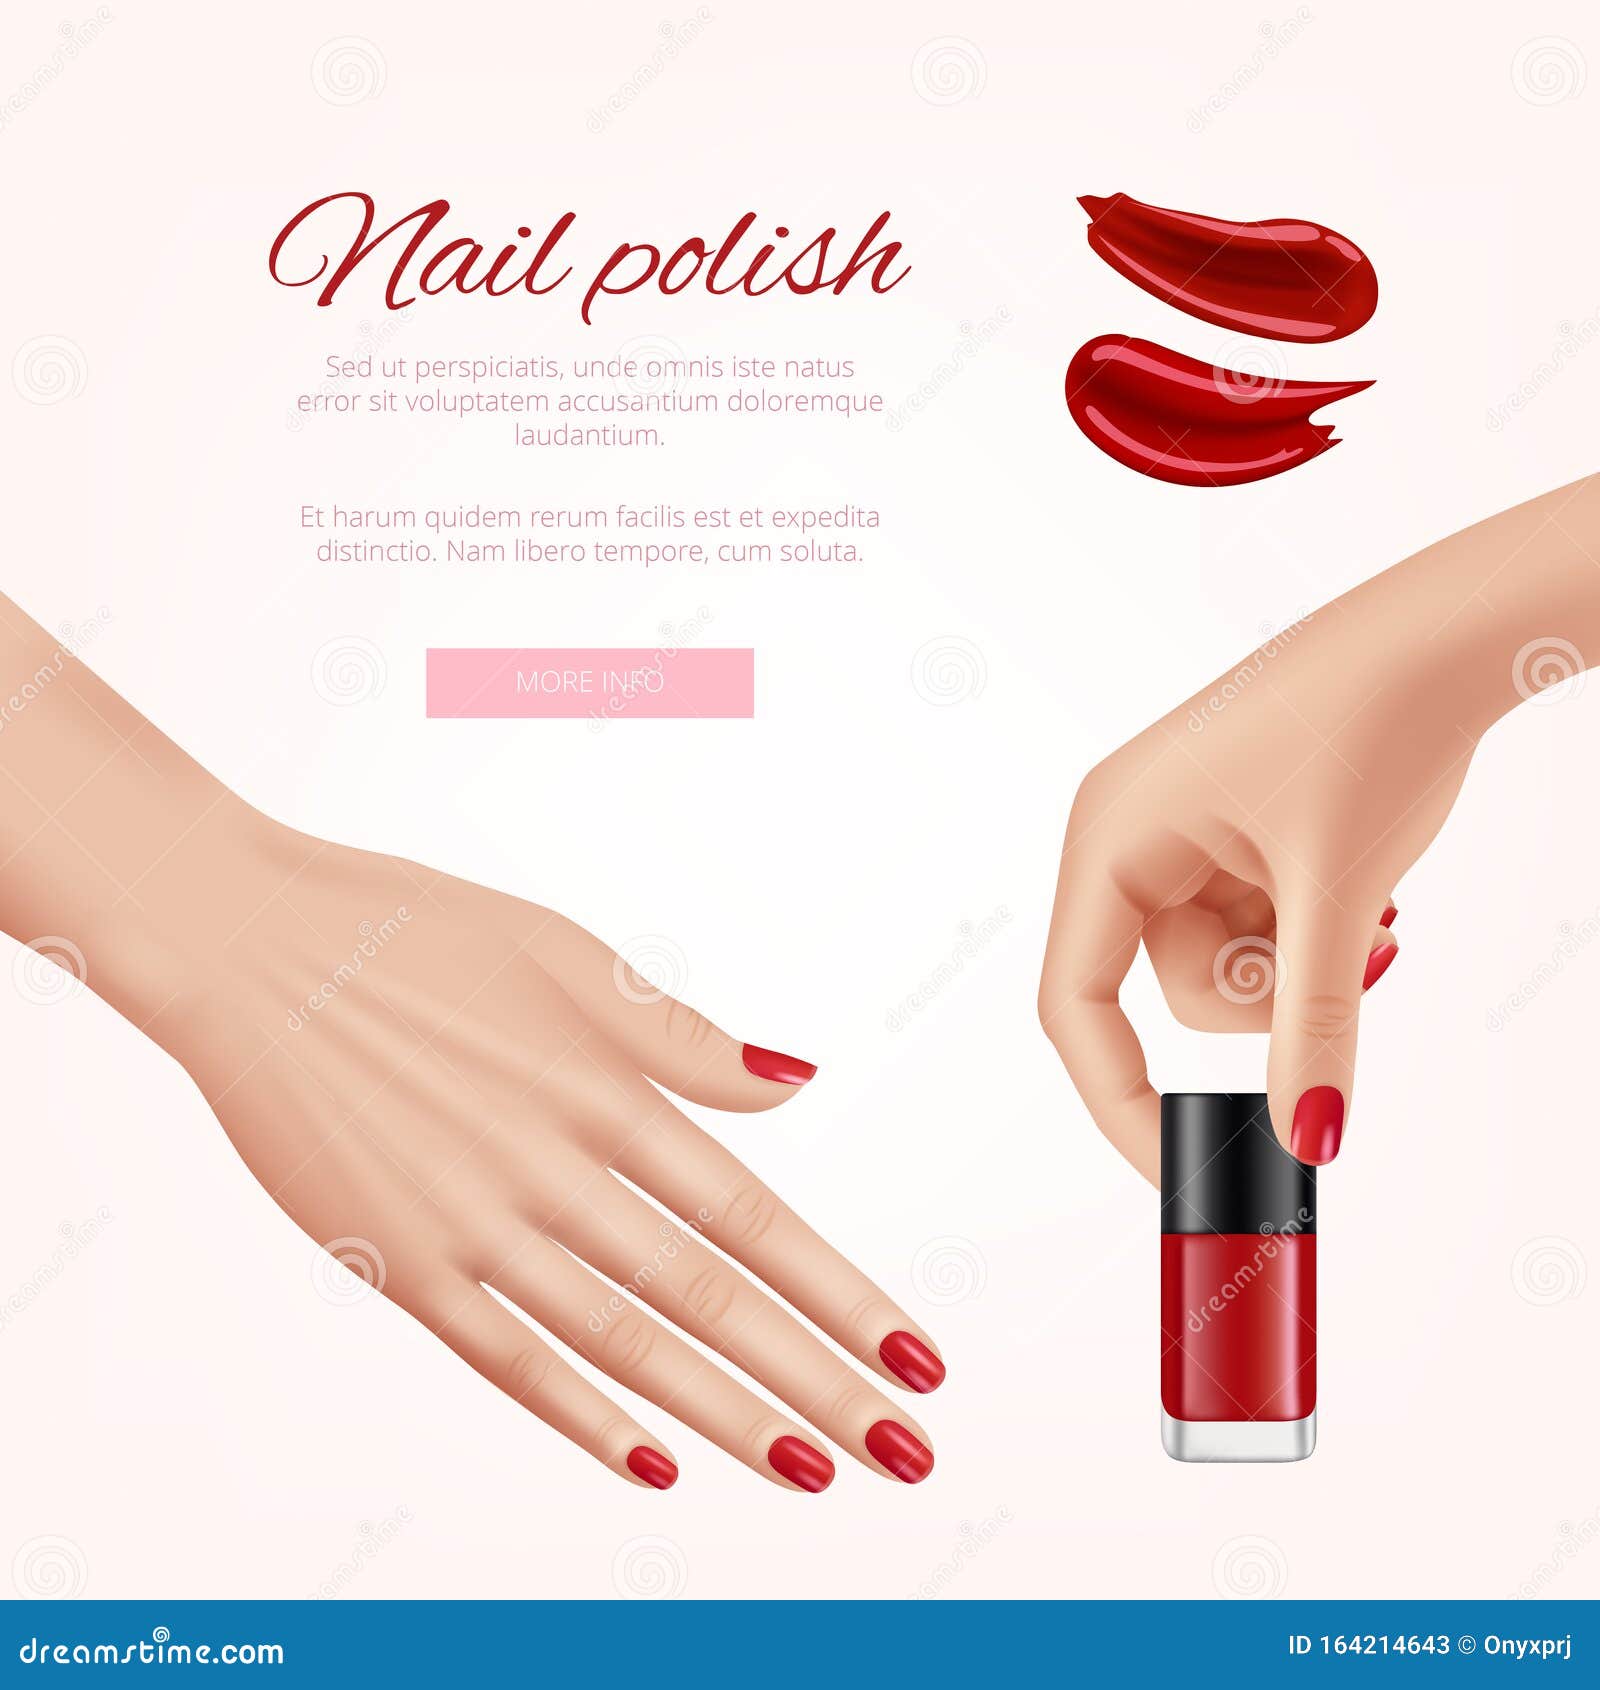 61,000+ Nail Polish Ads Images | Nail Polish Ads Stock Design Images Free  Download - Pikbest